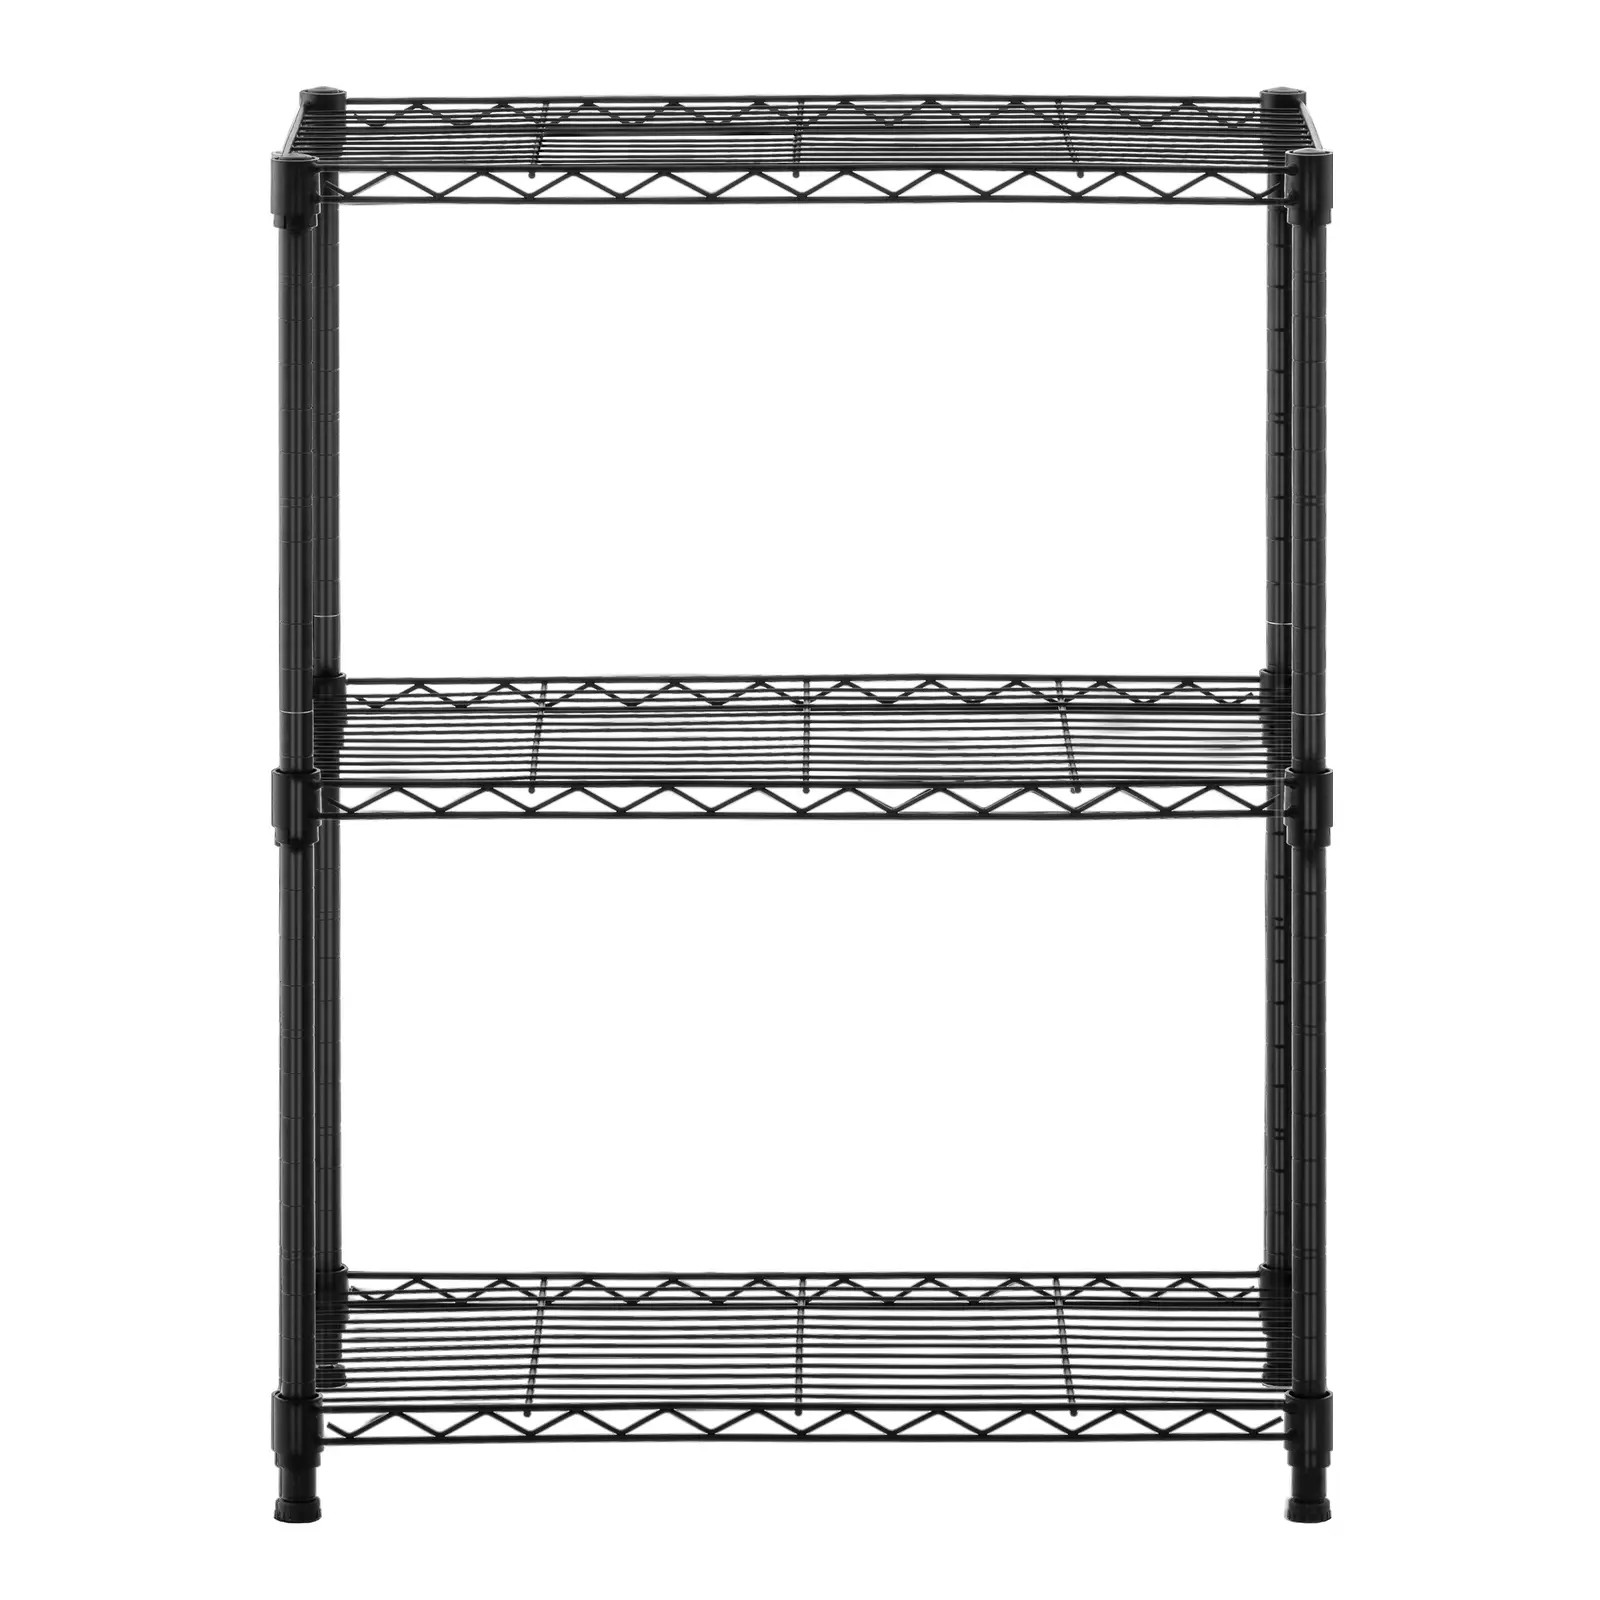 PALLET TO INCLUDE BLACK METAL RACKING